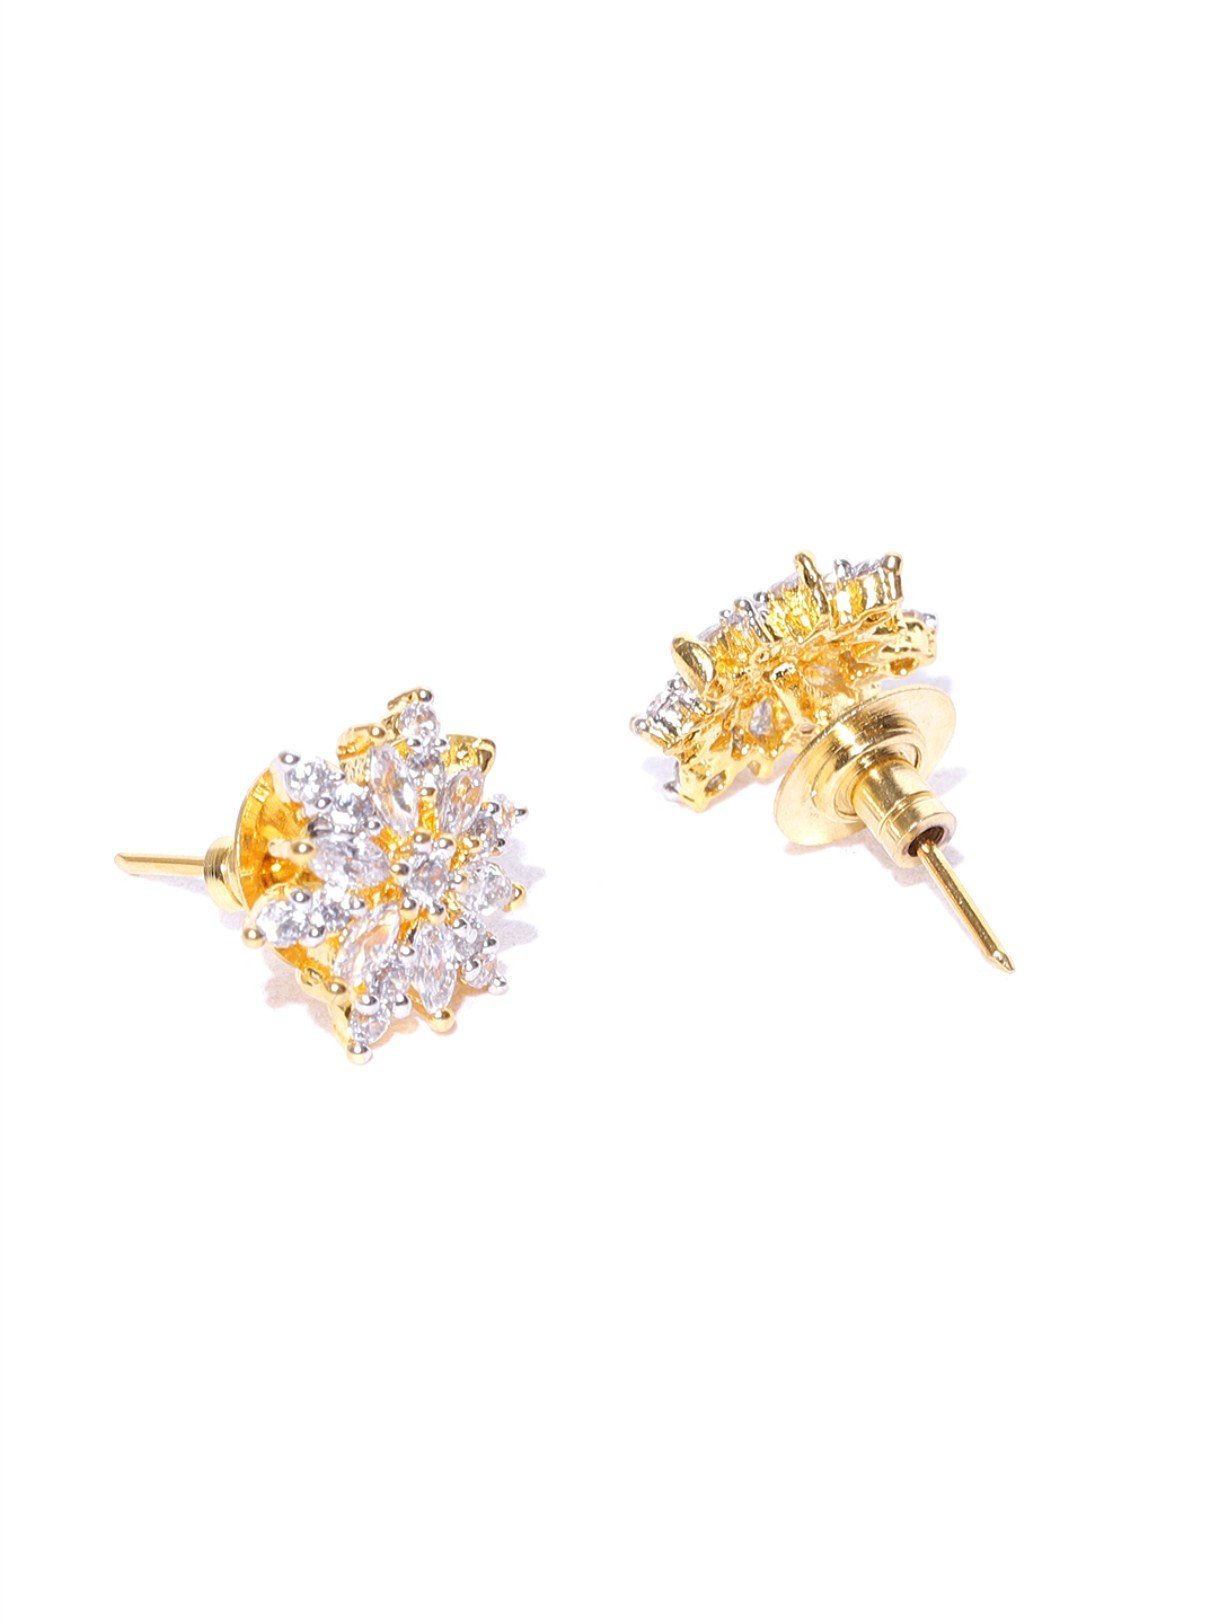 Women's Stylish Gold Plated Floral American Diamond Stud Earring For Women And Girls - Priyaasi